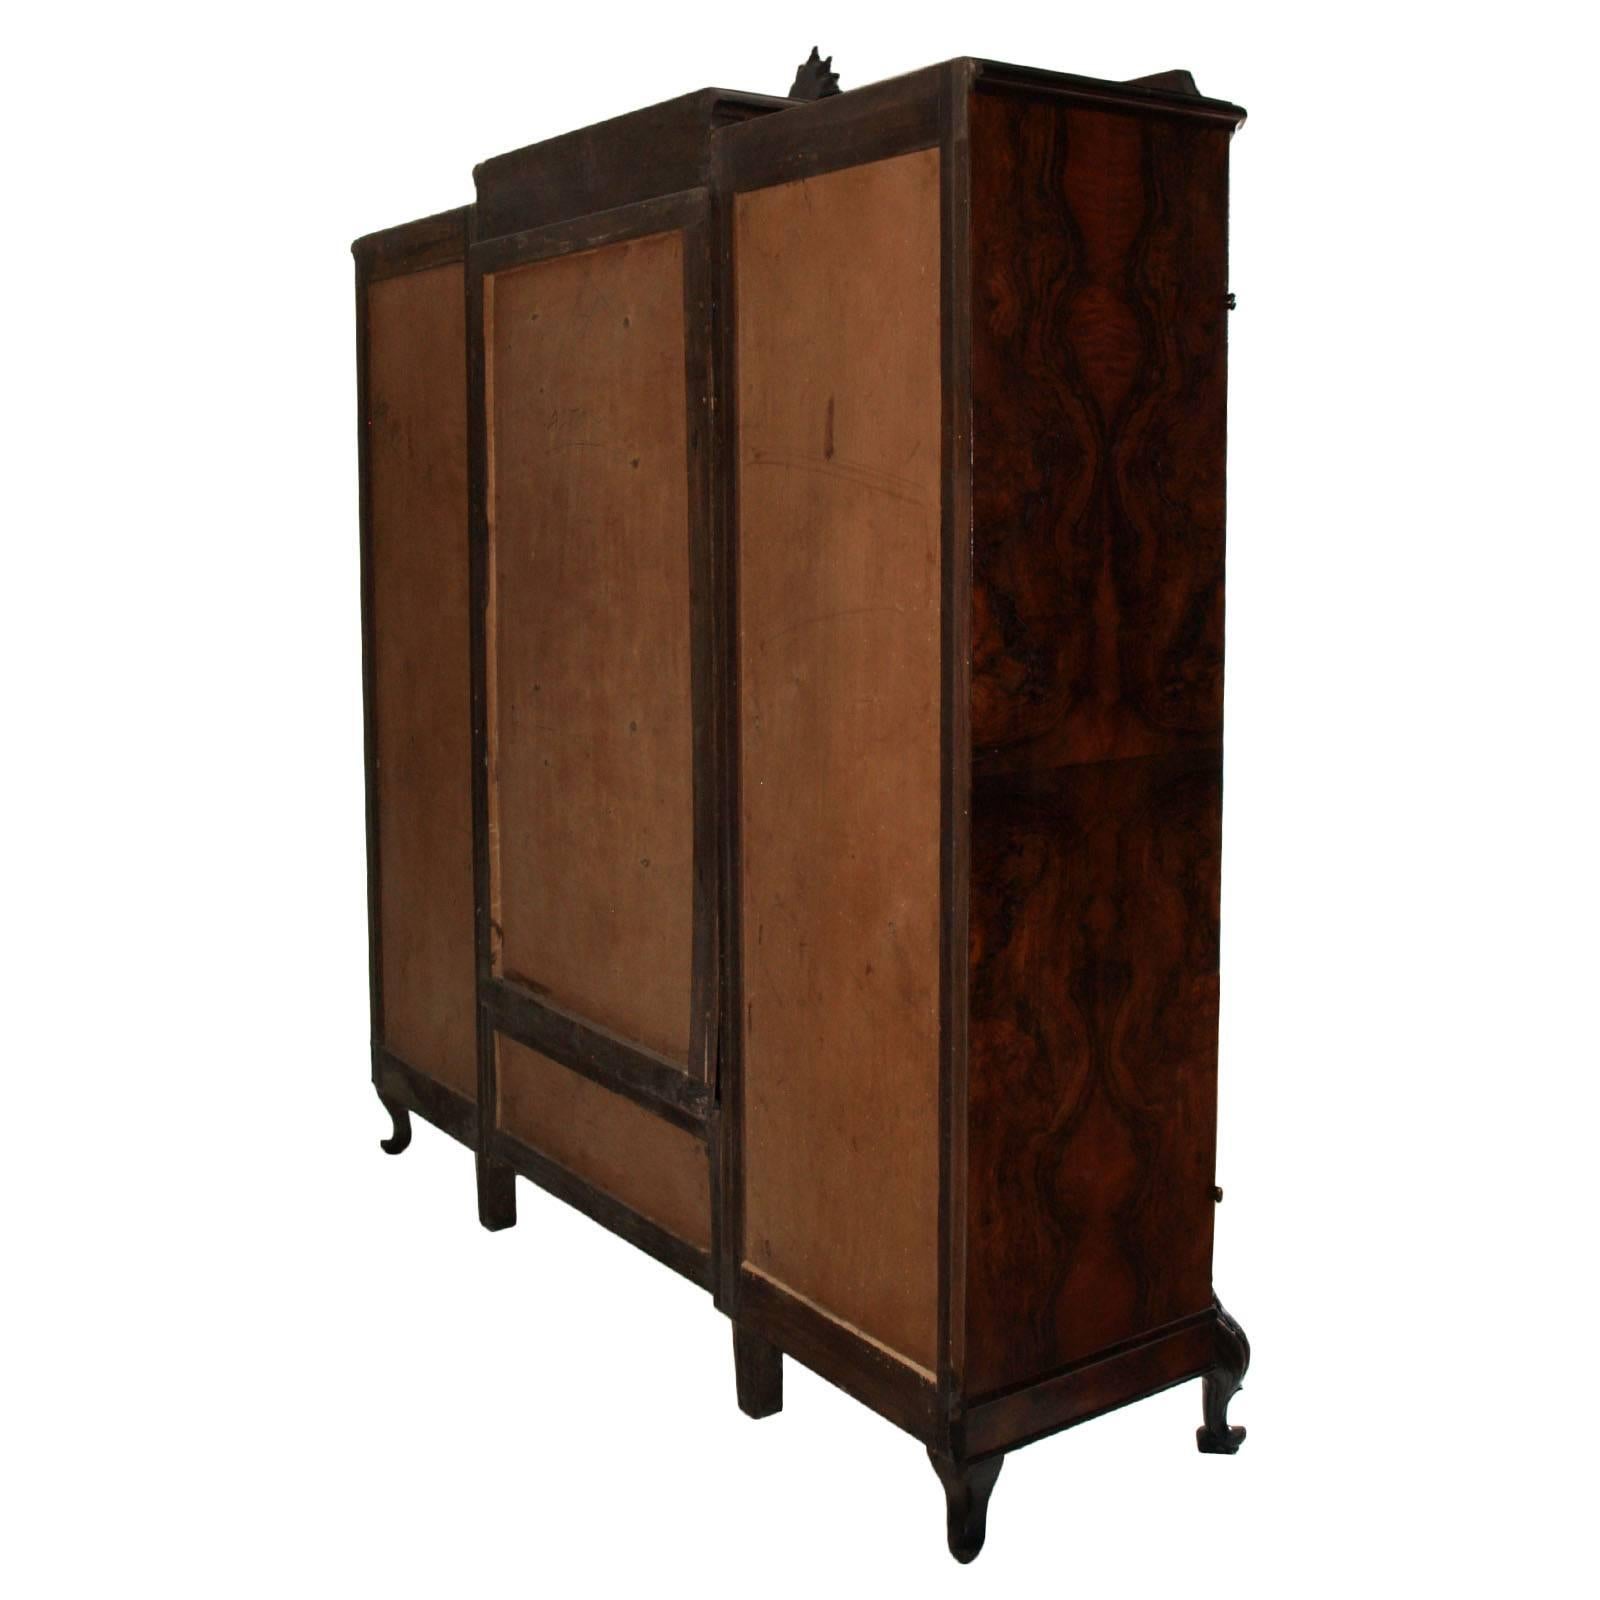 Early 20th Century Eclectic Baroque Chippendale Wardrobe in Burl and Ebonized Carved Walnut